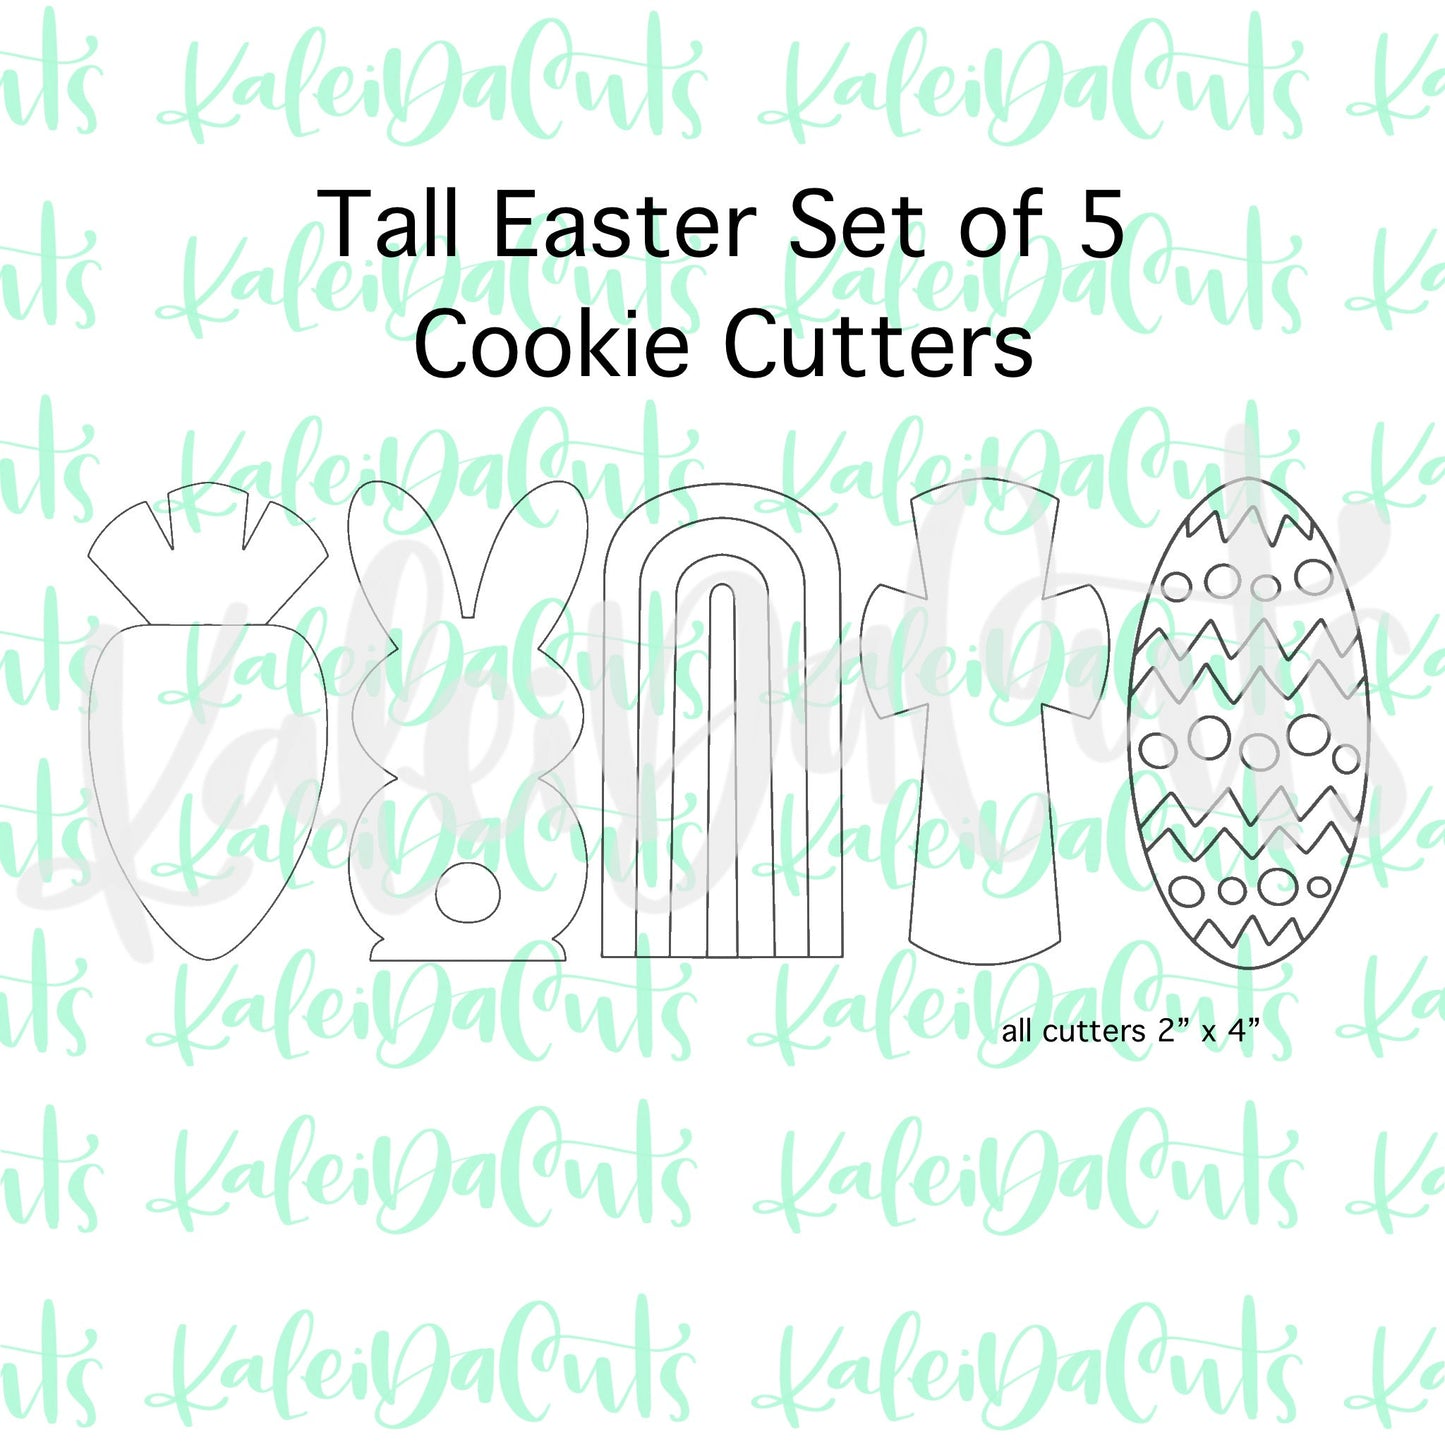 Tall Easter Set of 5 Cookie Cutters